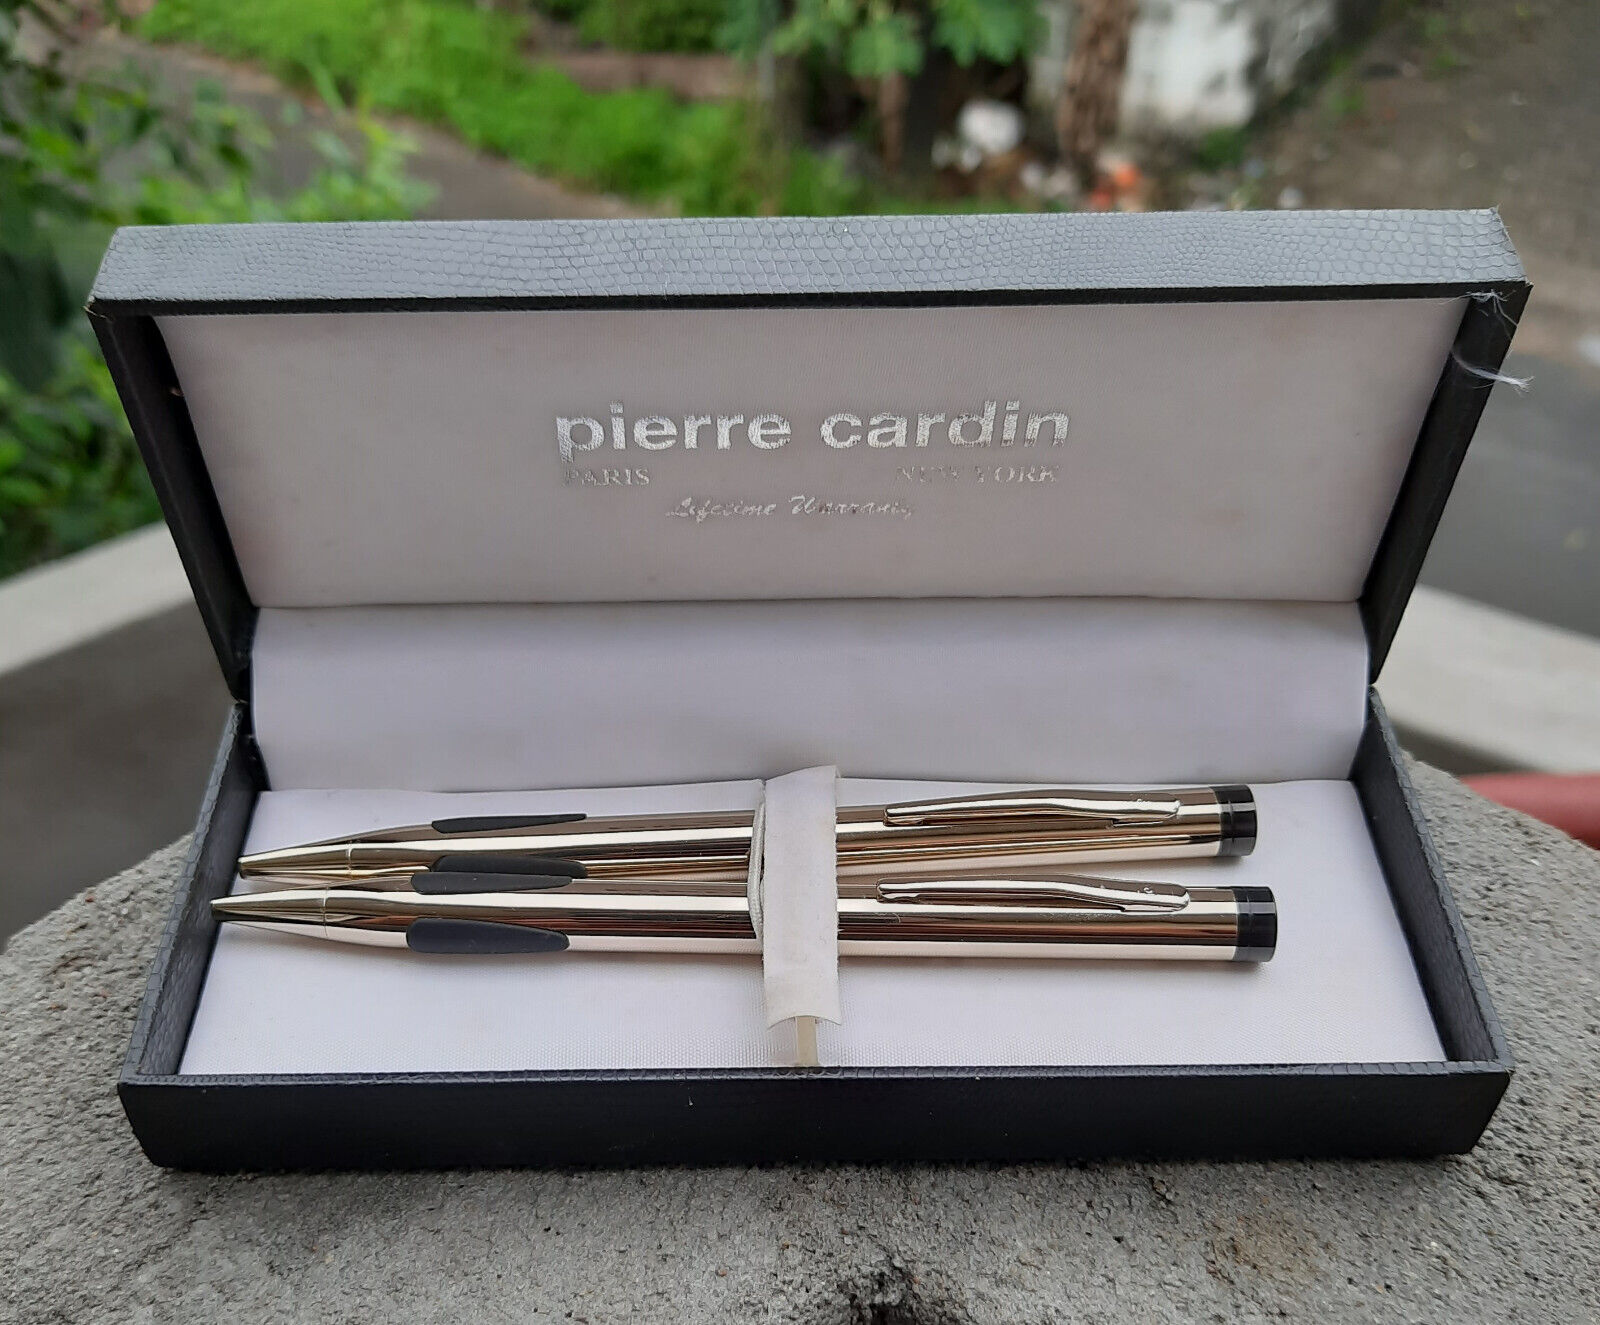 2x Vintage Pierre Cardin BALLPOINT PEN Gold Plated with Original Box (Unused)